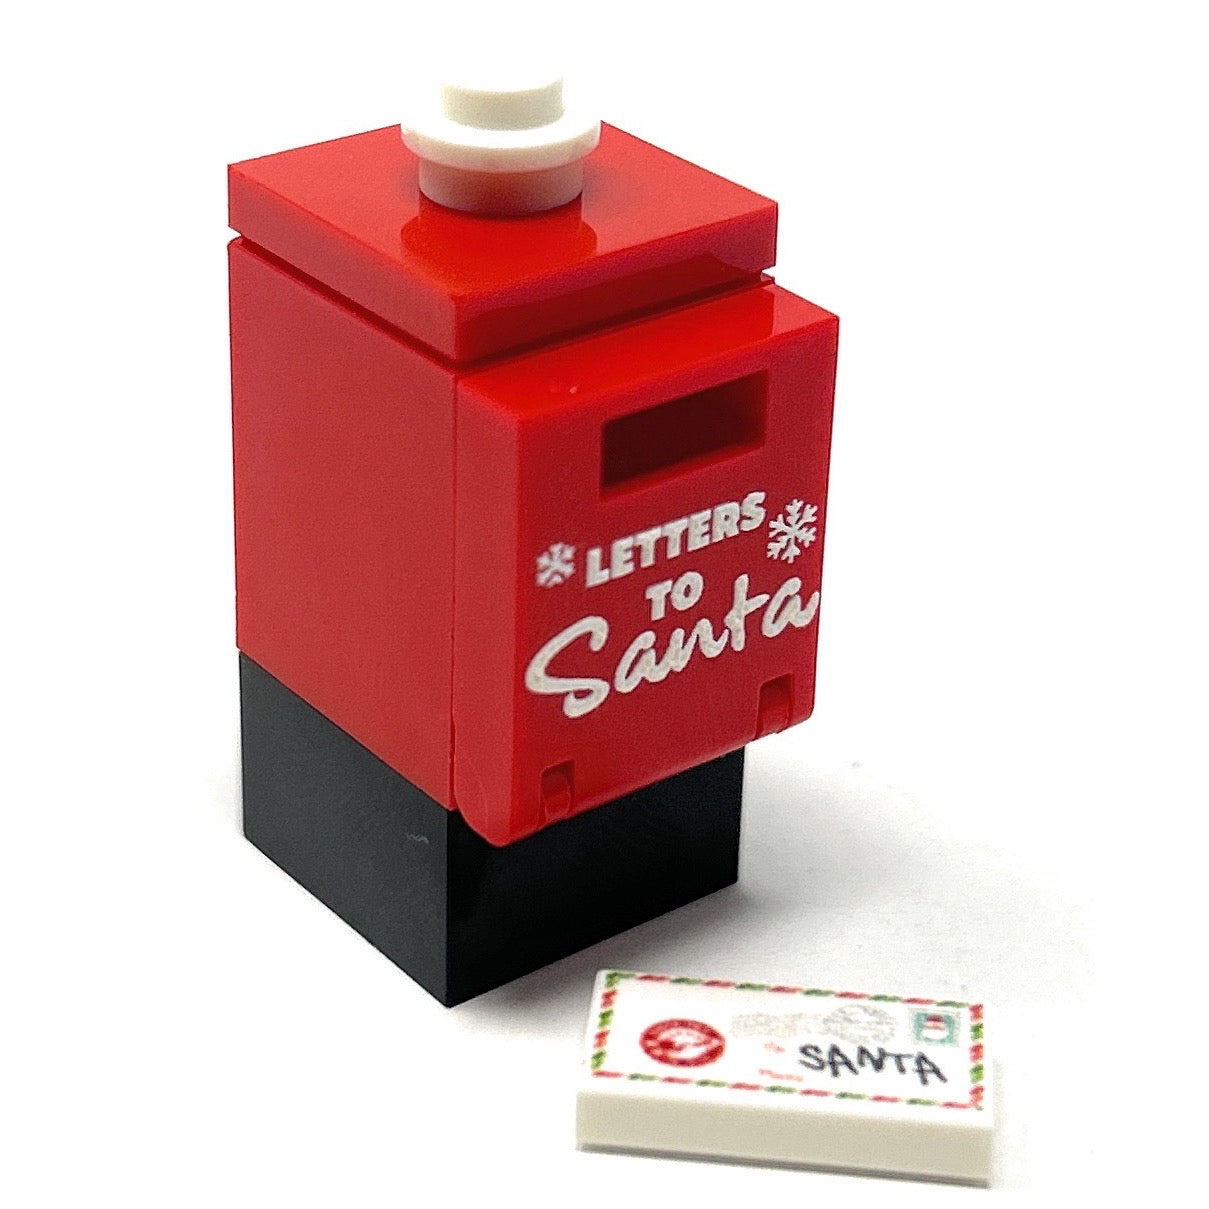 Letter to Santa Mailbox and Envelope made using LEGO parts - B3 Customs